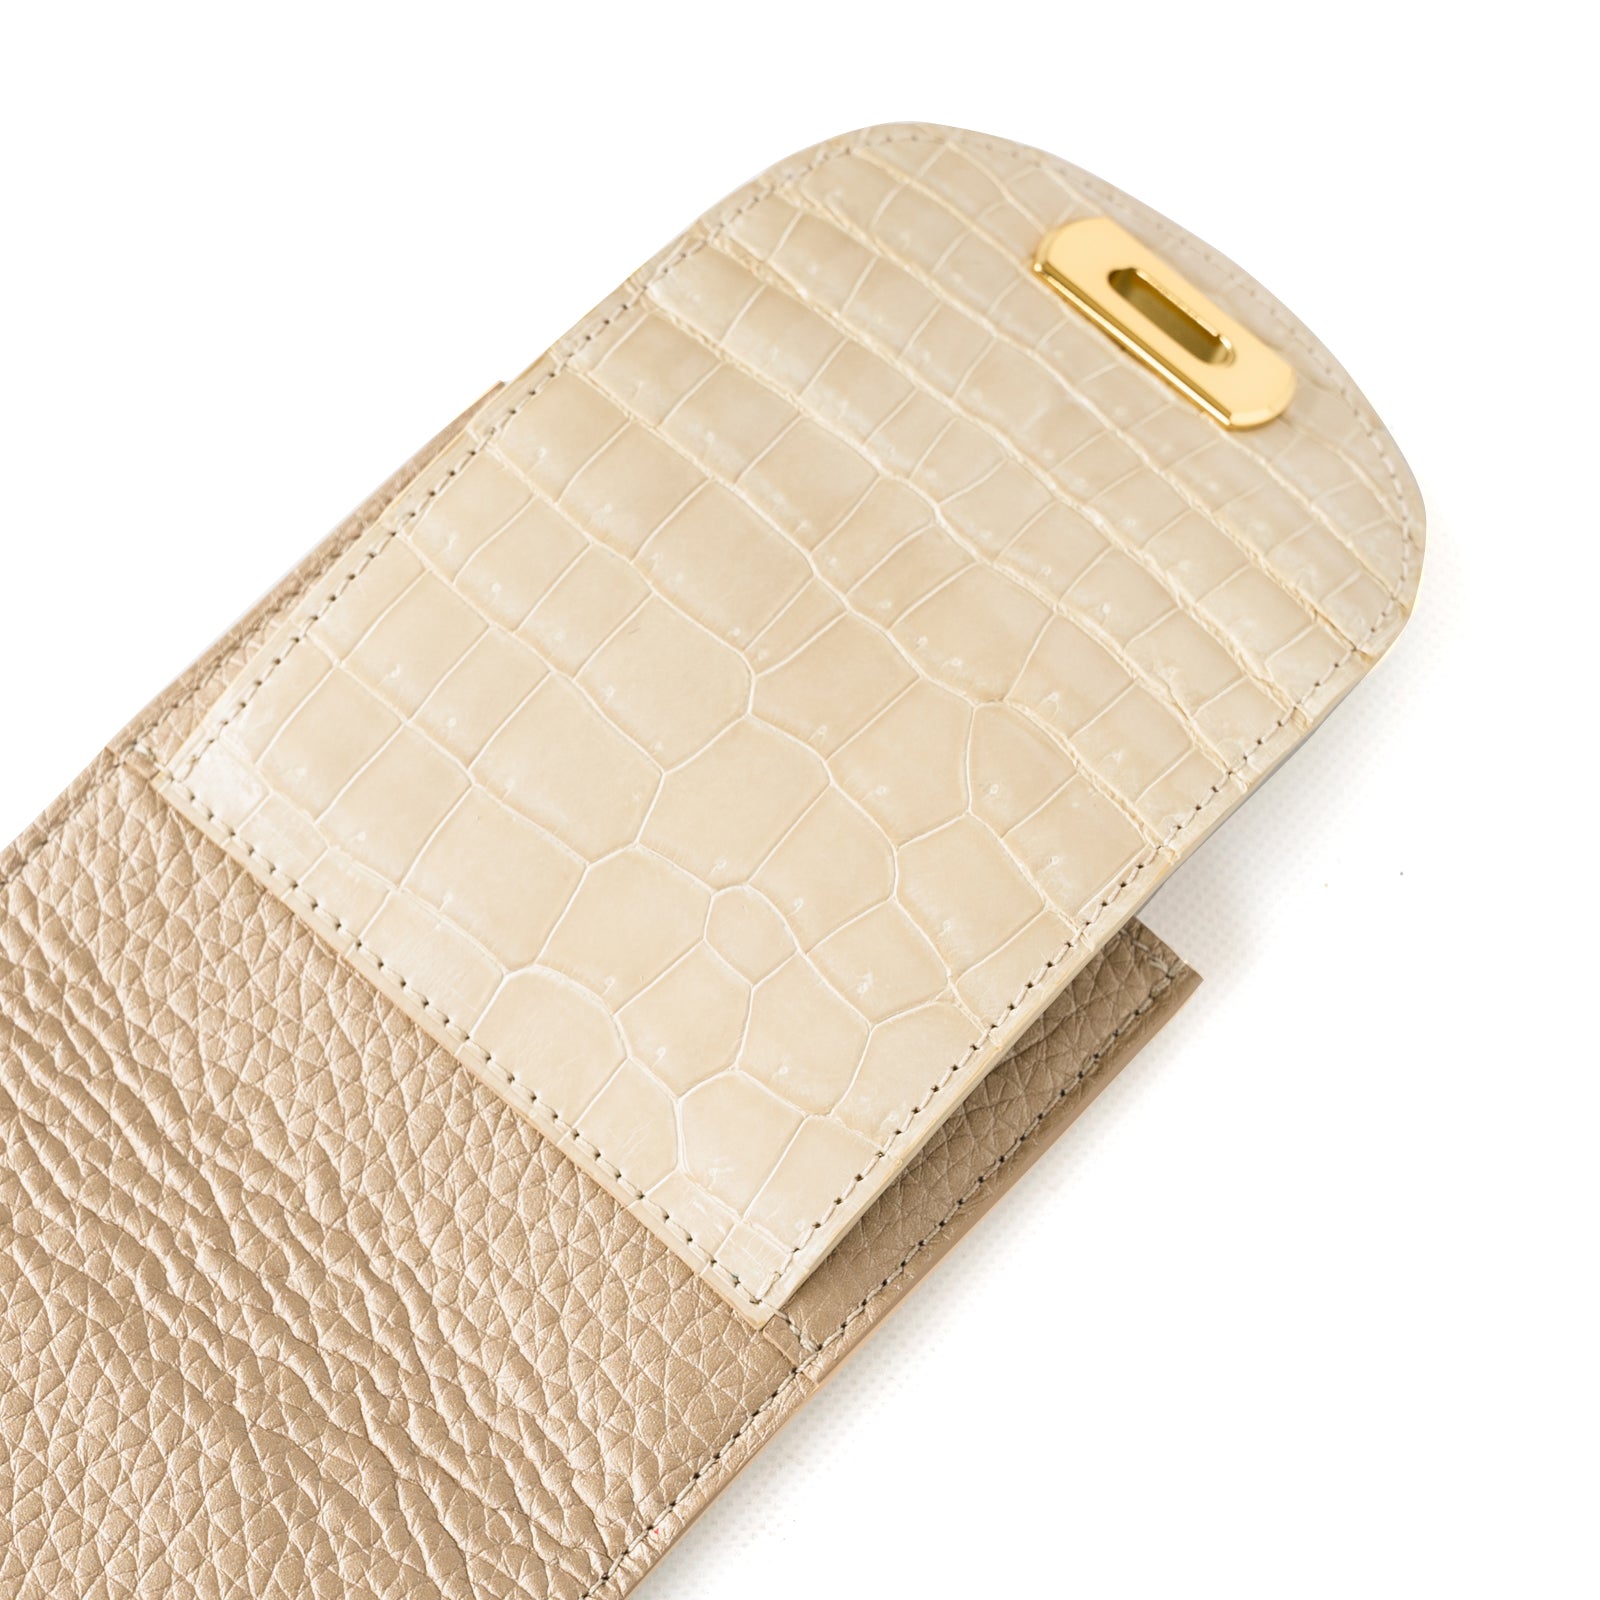 [Limited Item] Bi-fold Wallet Eclair Taurillon Clemence Crocodile Combination / Champagne Gold 